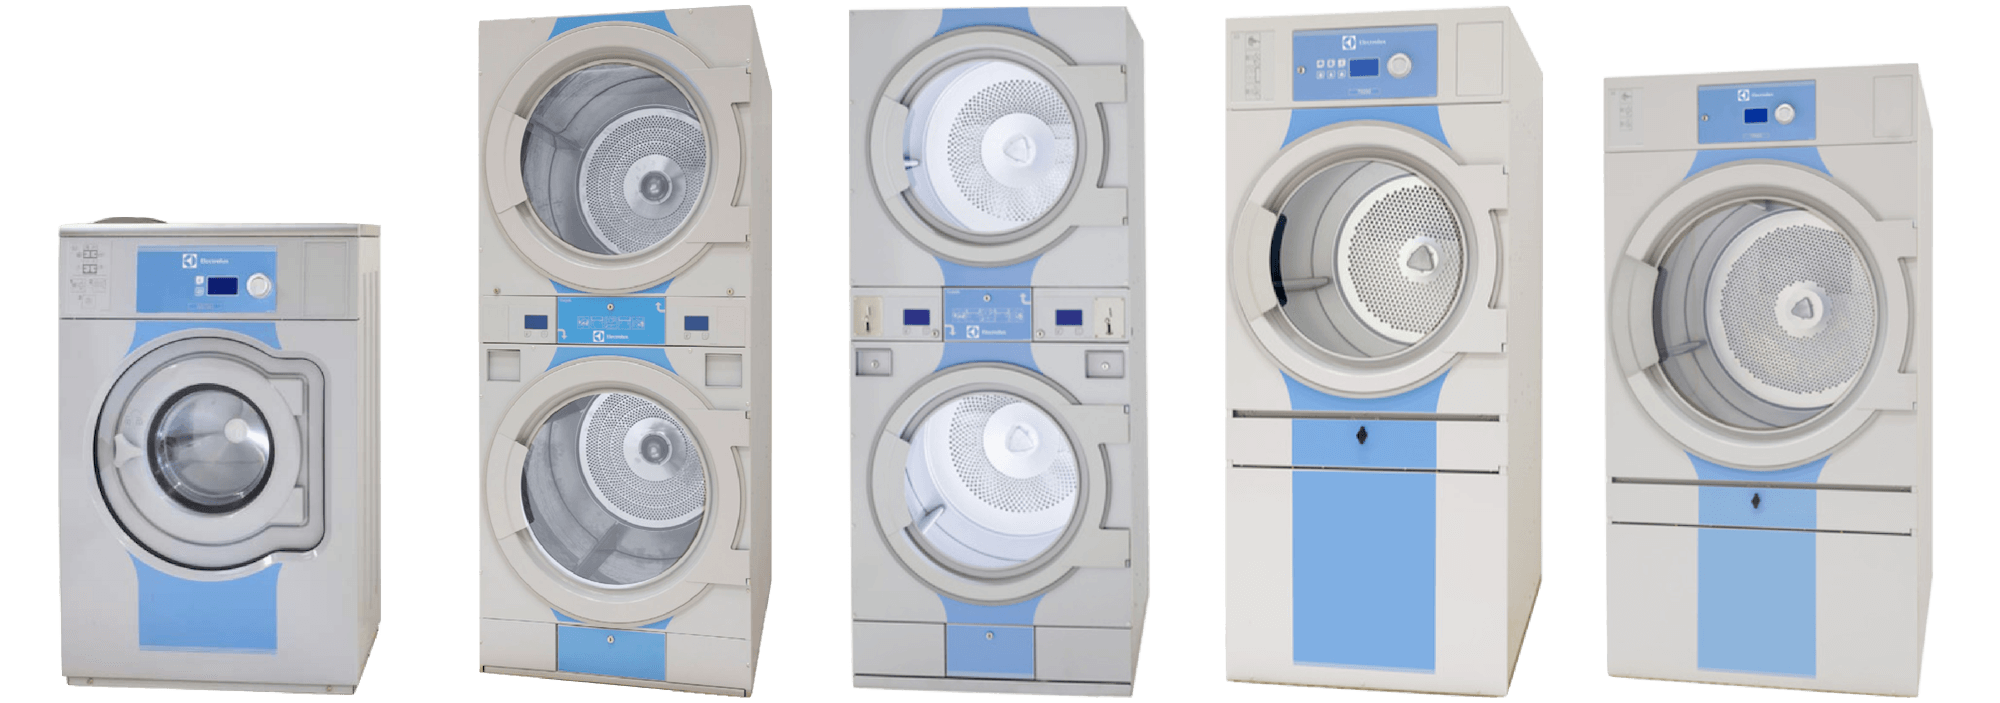 Electrolux professional commercial washers and dryers sold by All Season Commercial Laundry Repair, Montana's Electrolux and Wascomatcoin and on-premises laundry equipment distributor and commercial laundry parts and repair service provider.